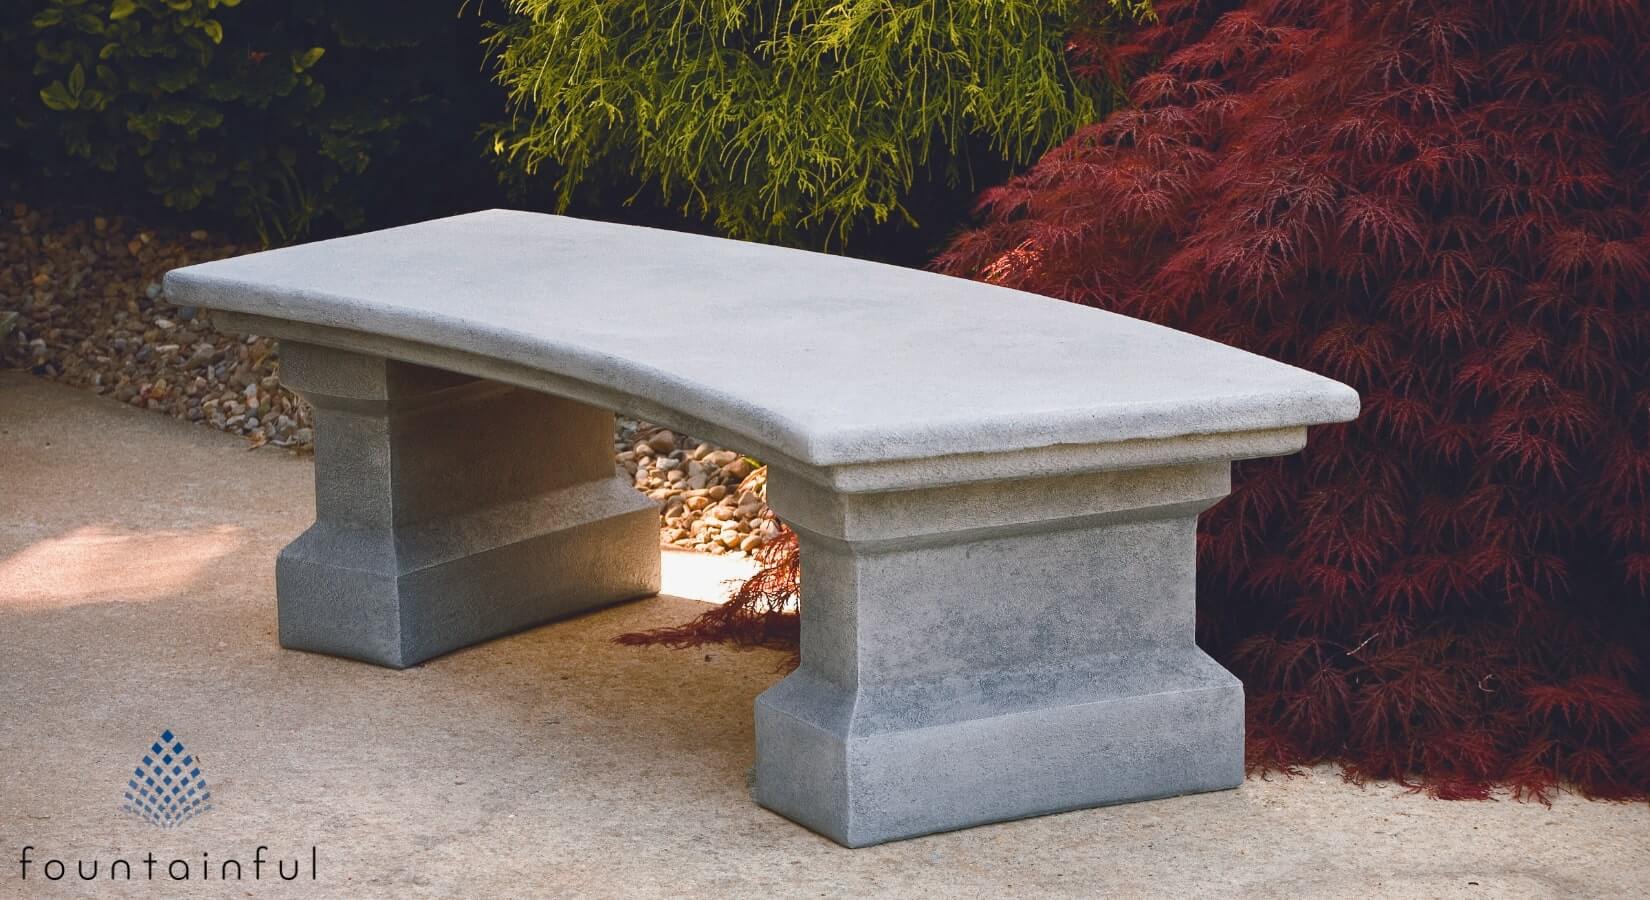 massarelli's classic curved concrete garden bench on a pathway